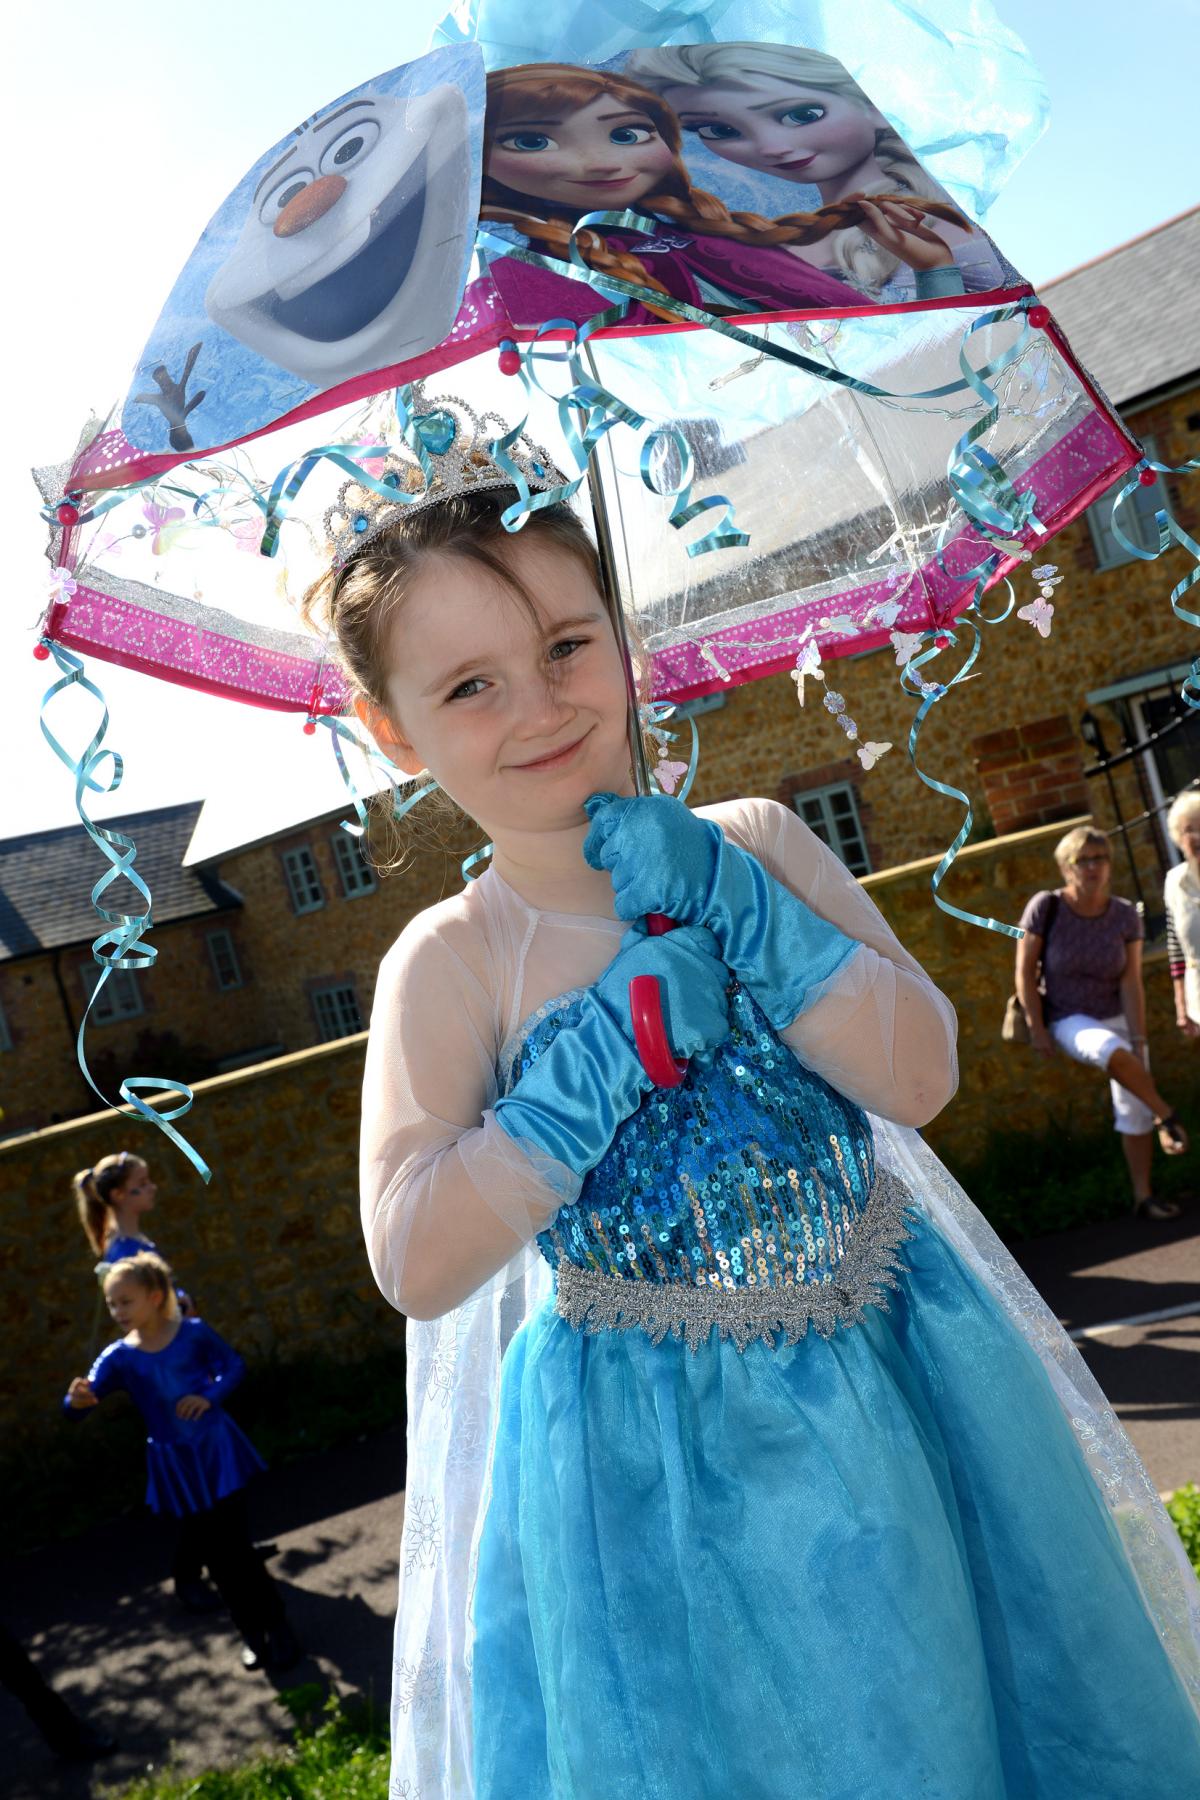 Colour and costumes at this year's Ilminster Childrens Carnival